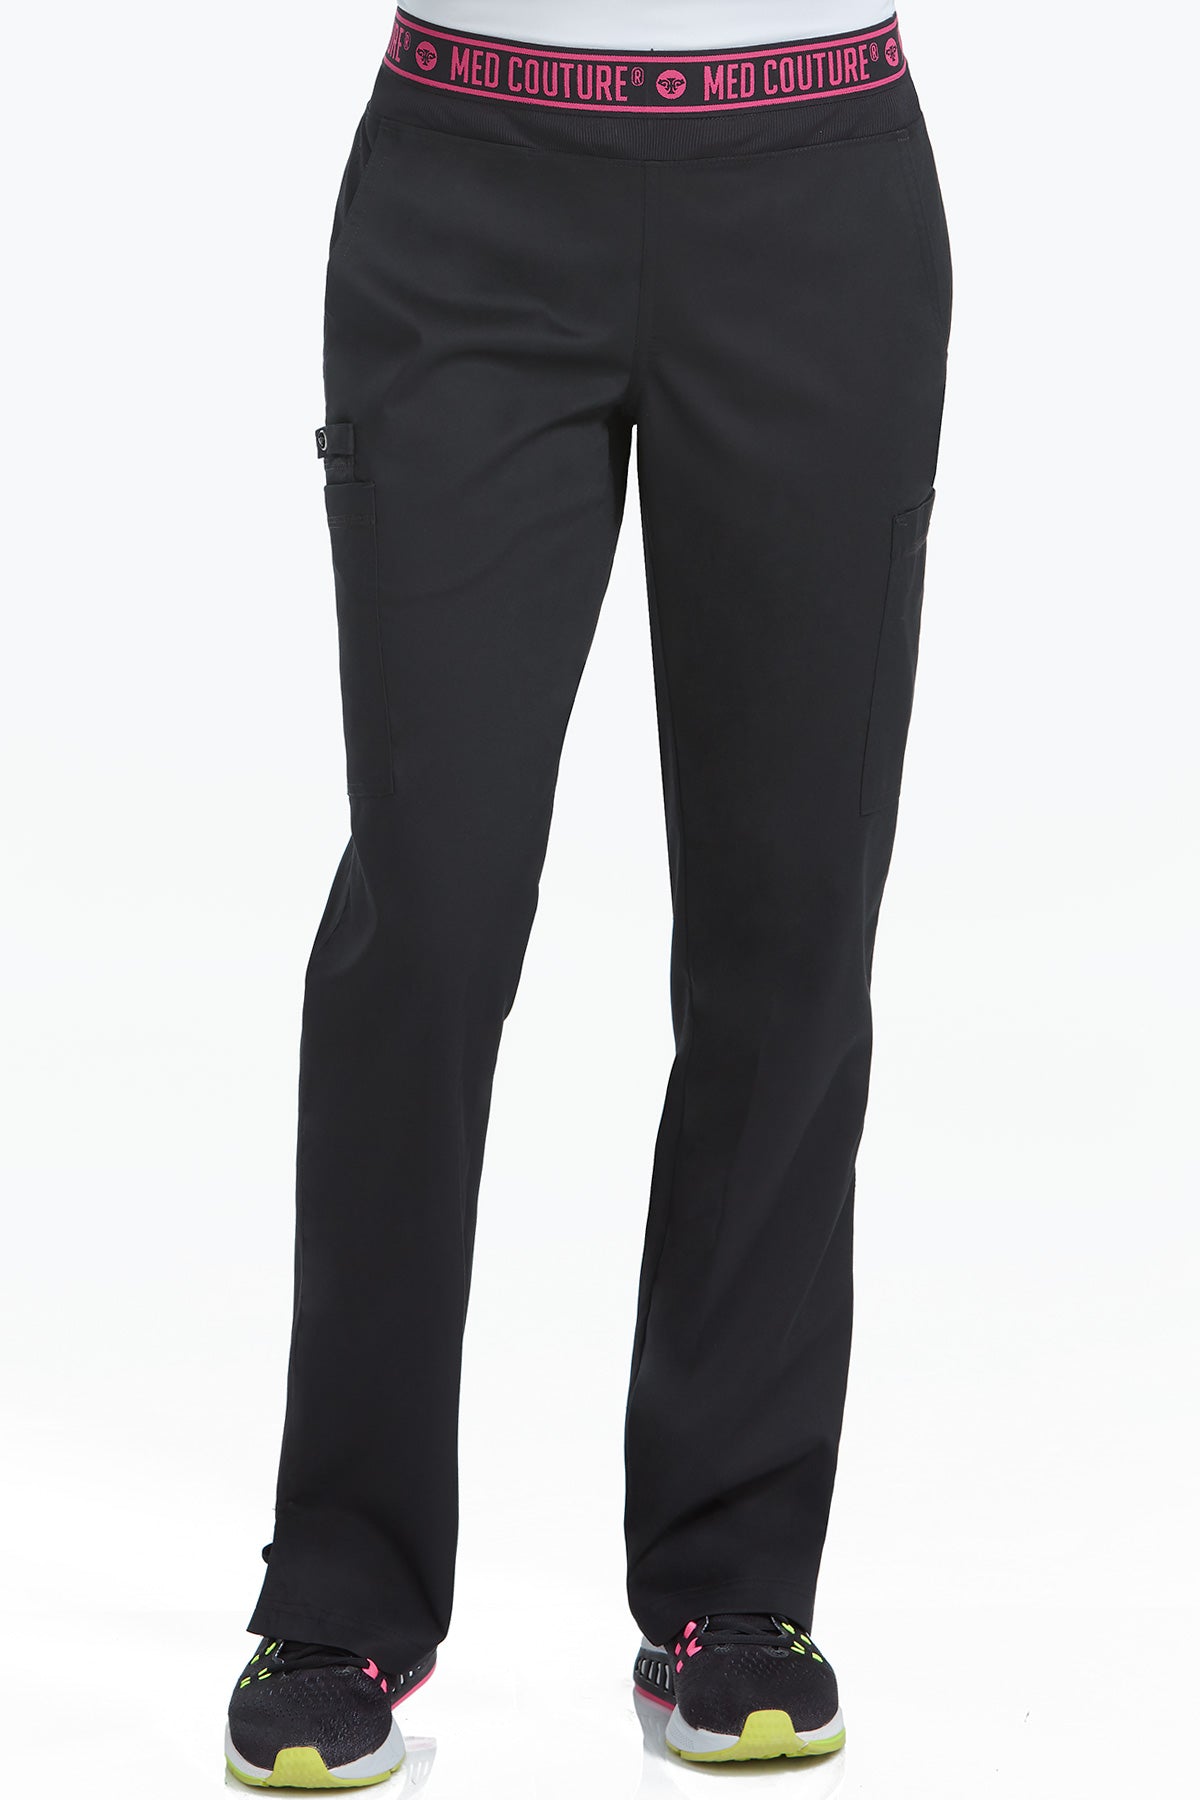 Med Couture Scrub Pants Touch Ally Yoga Pant in Black at Parker's Clothing and Shoes.